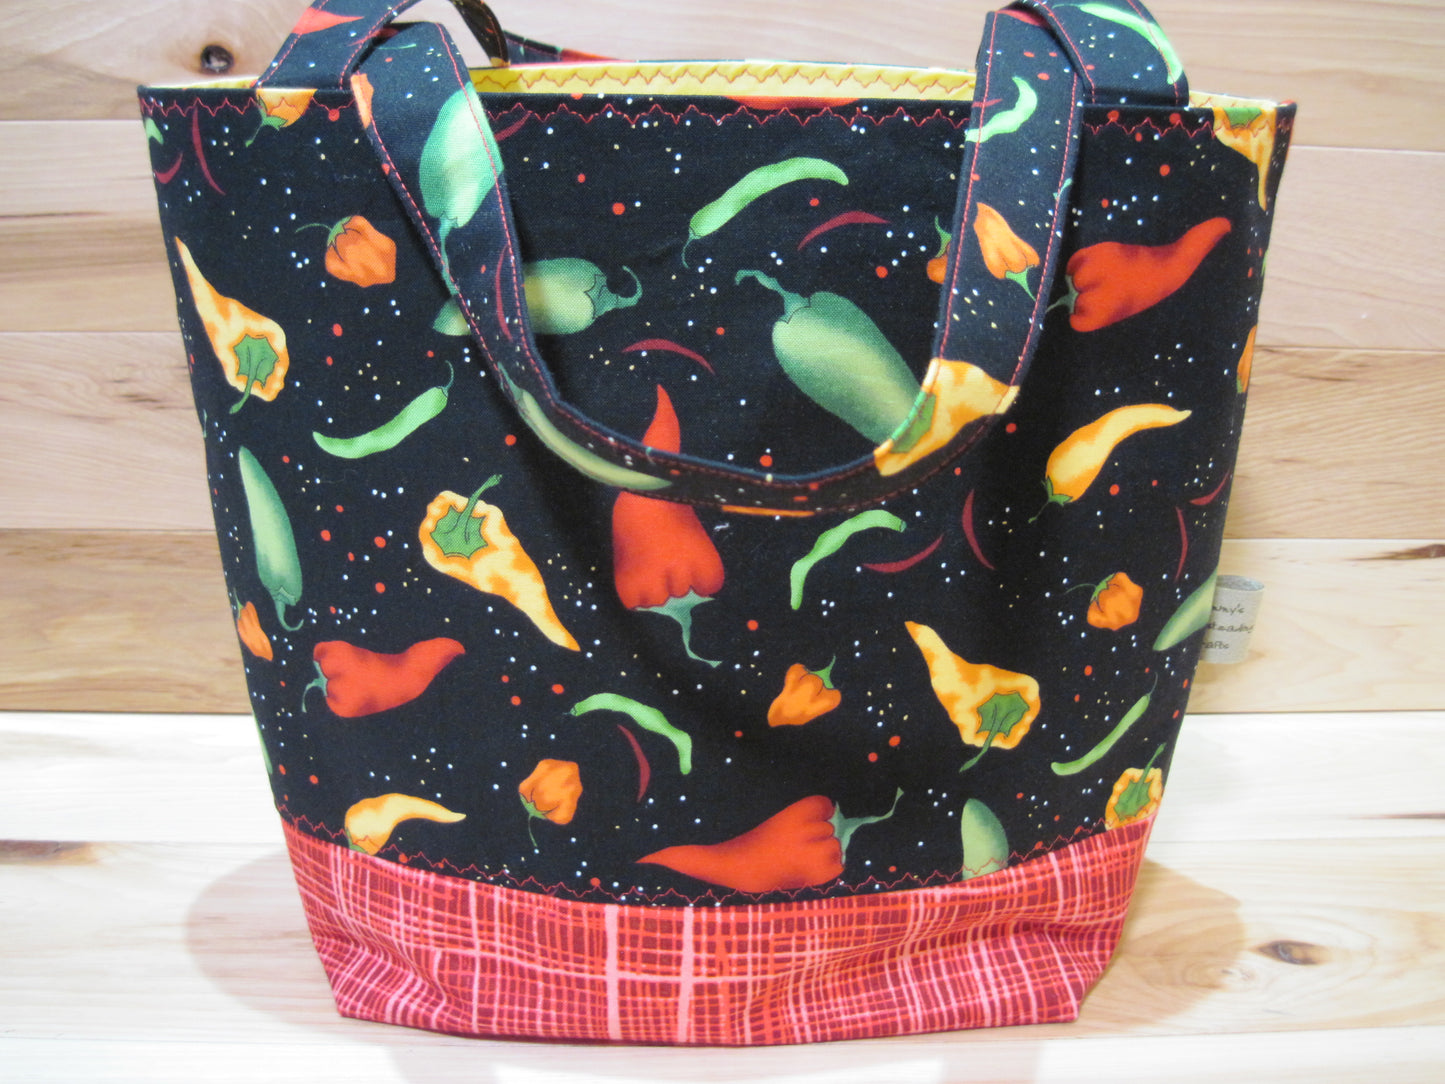 Large Tote Style Bag ~ Multicolored peppers w/ yellow inside & sewn handles